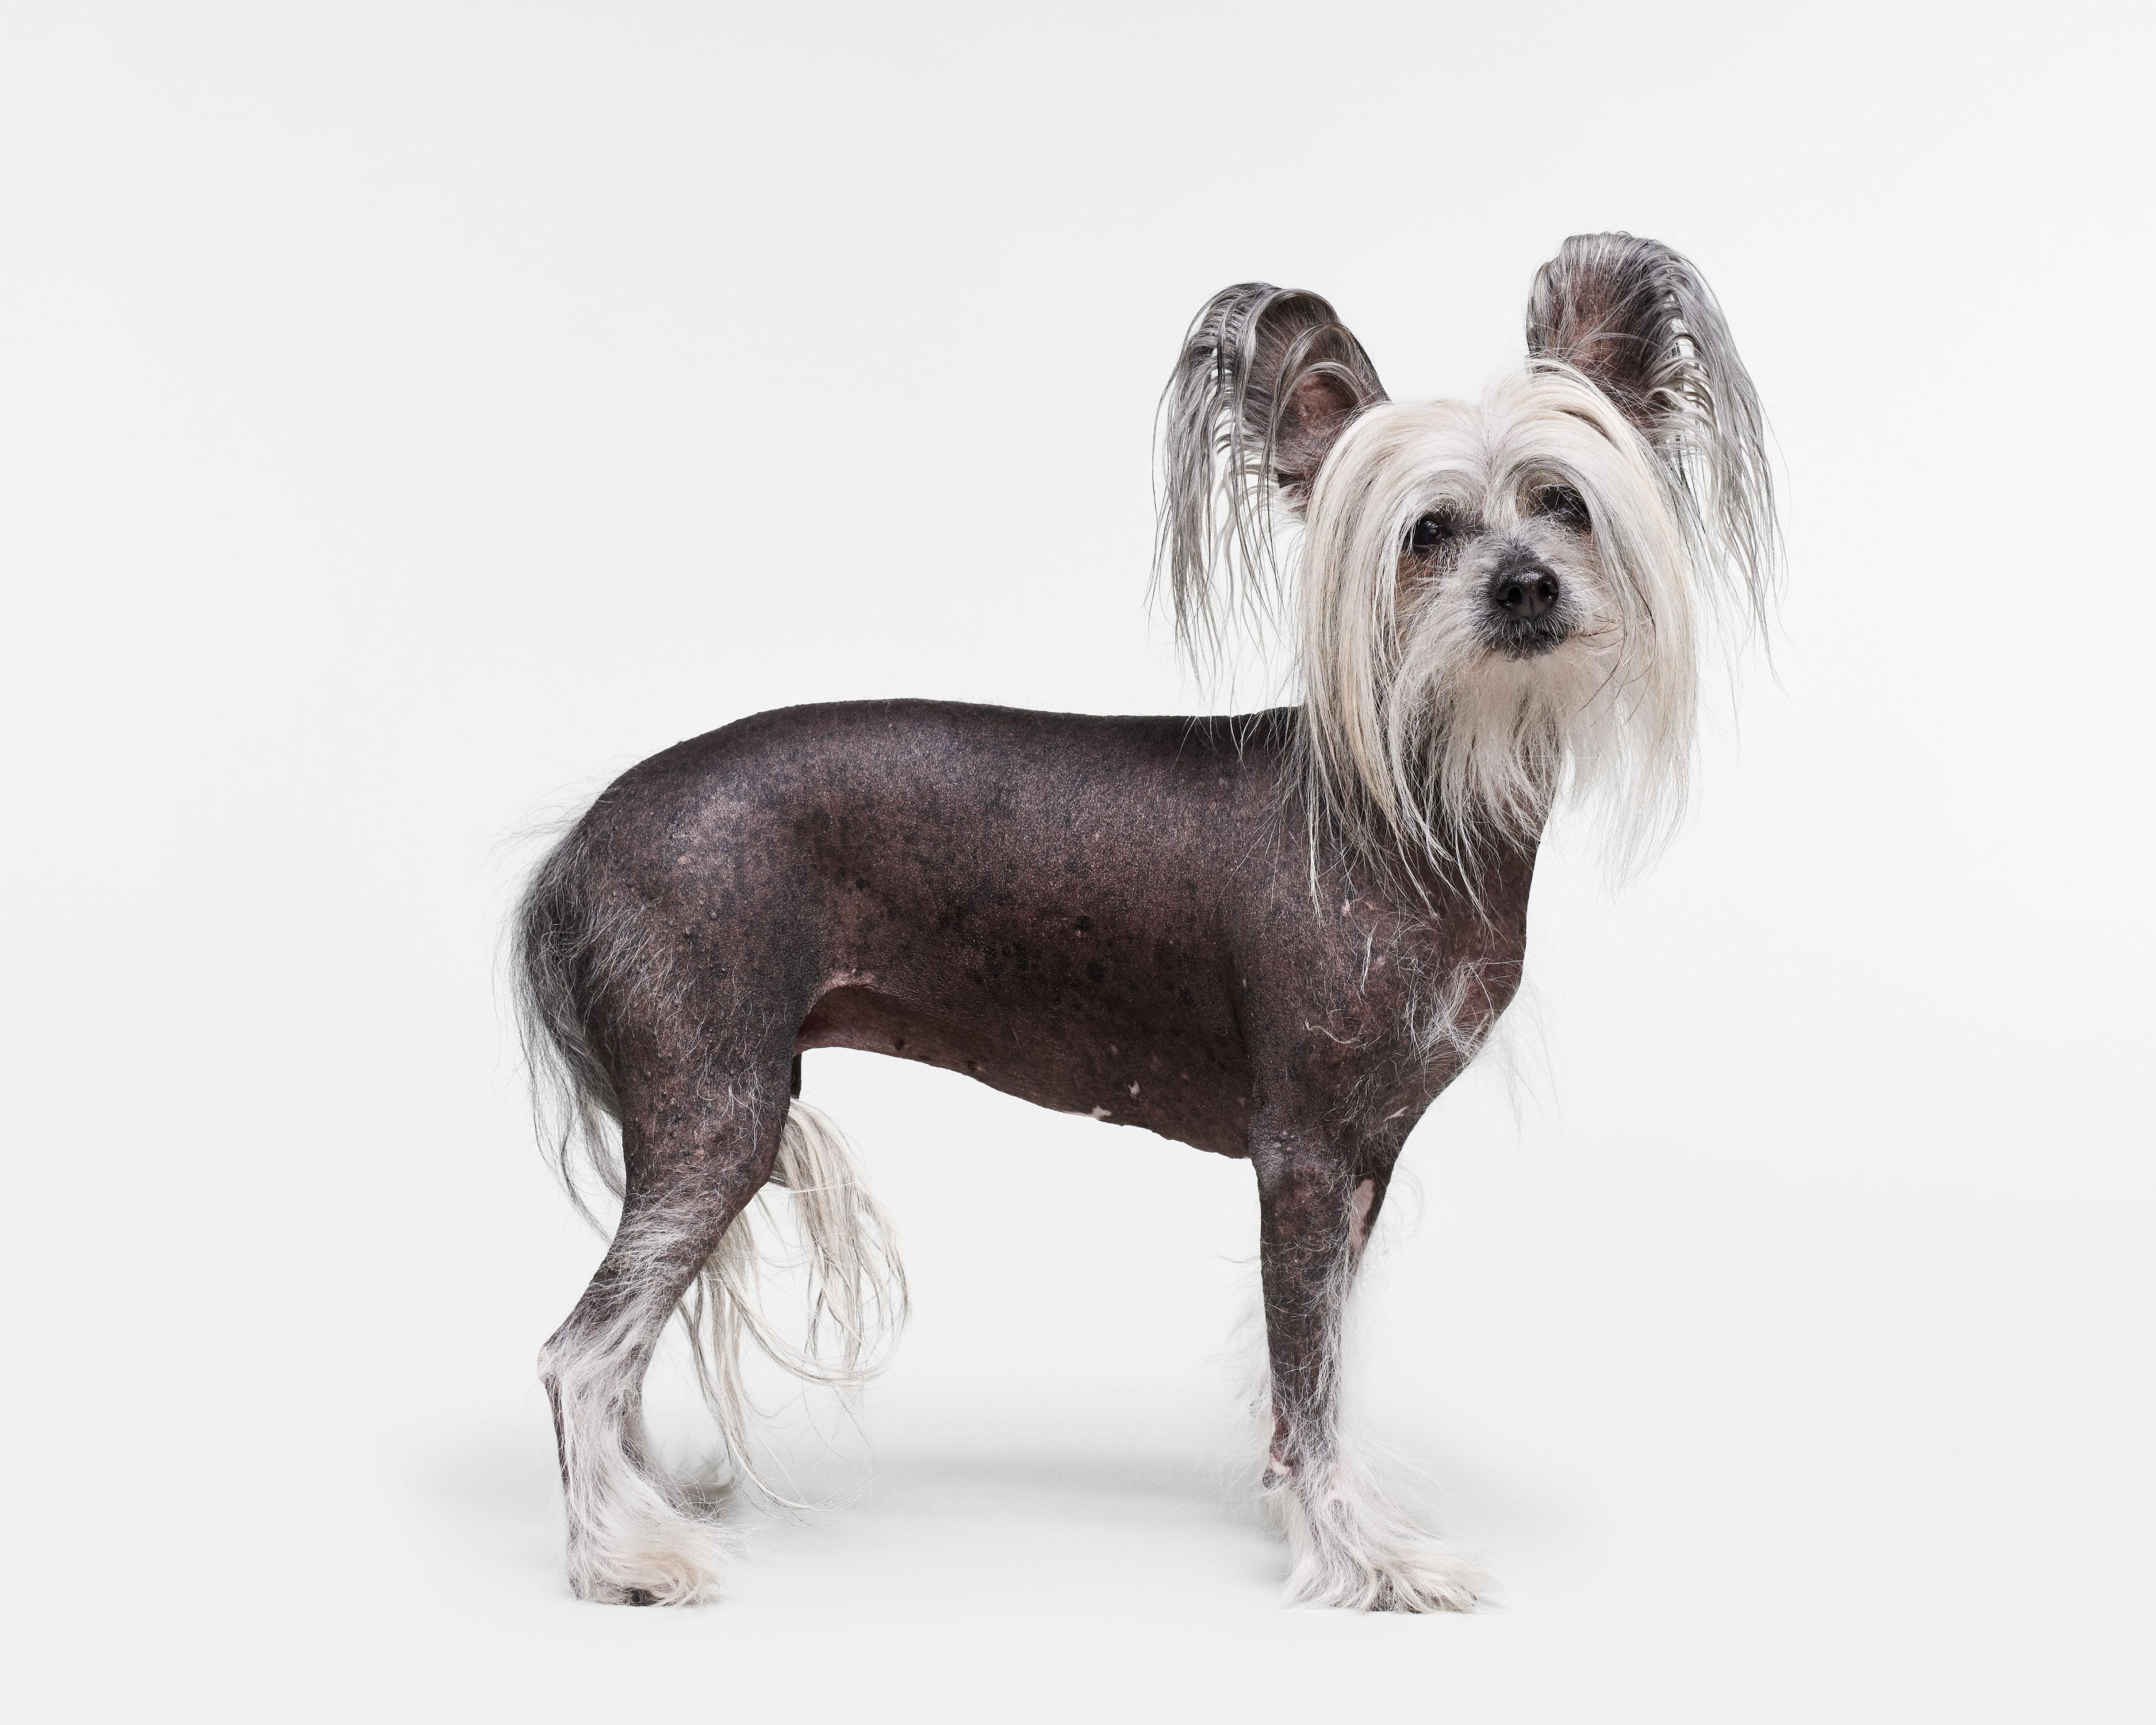 Randal Ford - Chinese Crested Dog, Photography 2018, Printed After